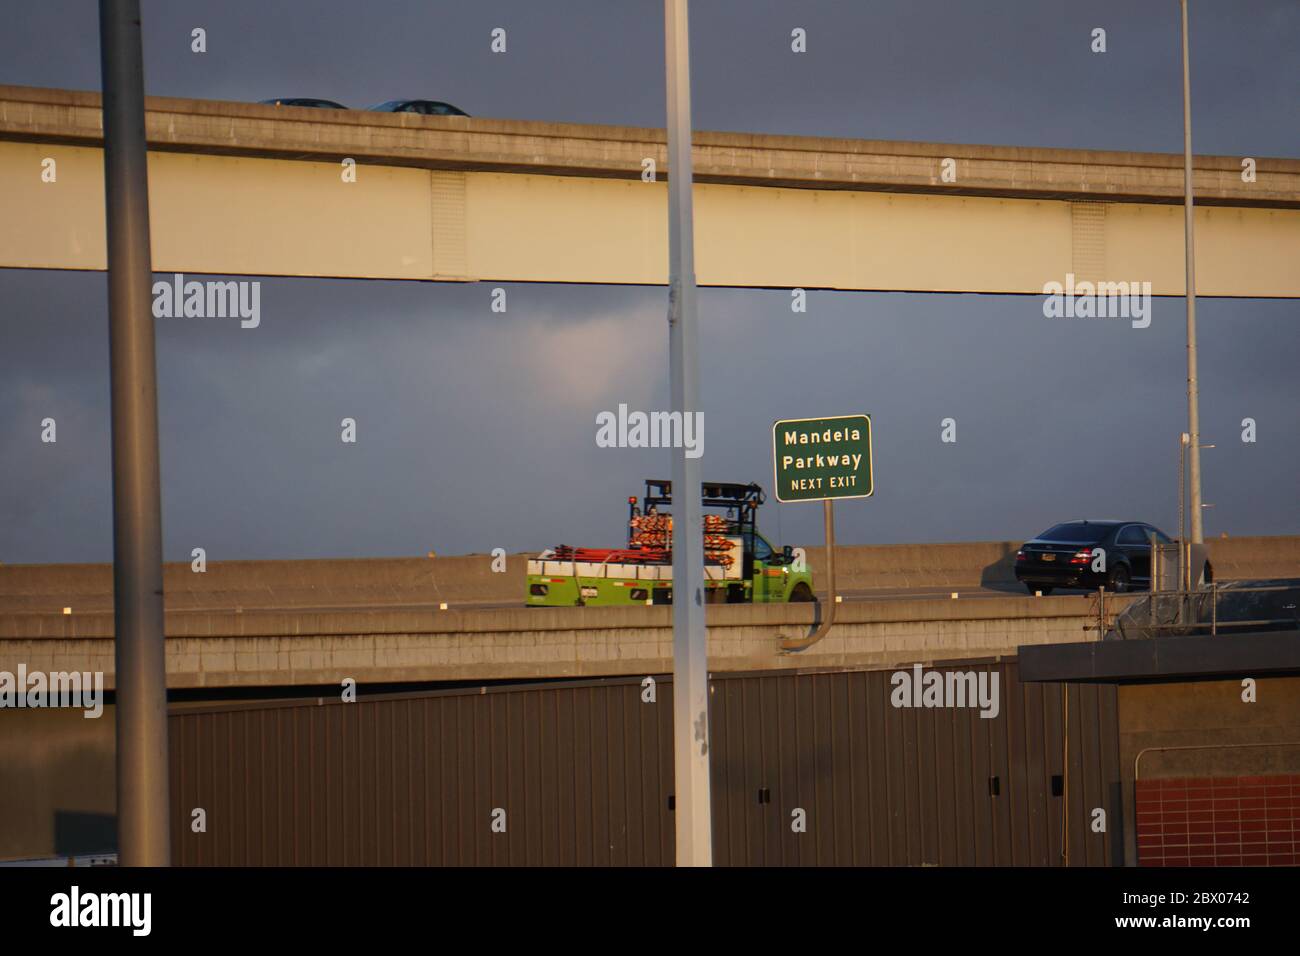 Truck and cars on highway overpass with green Next Exit sign for Mandela Parkway. Road transportation system. West Oakland, California, USA Stock Photo